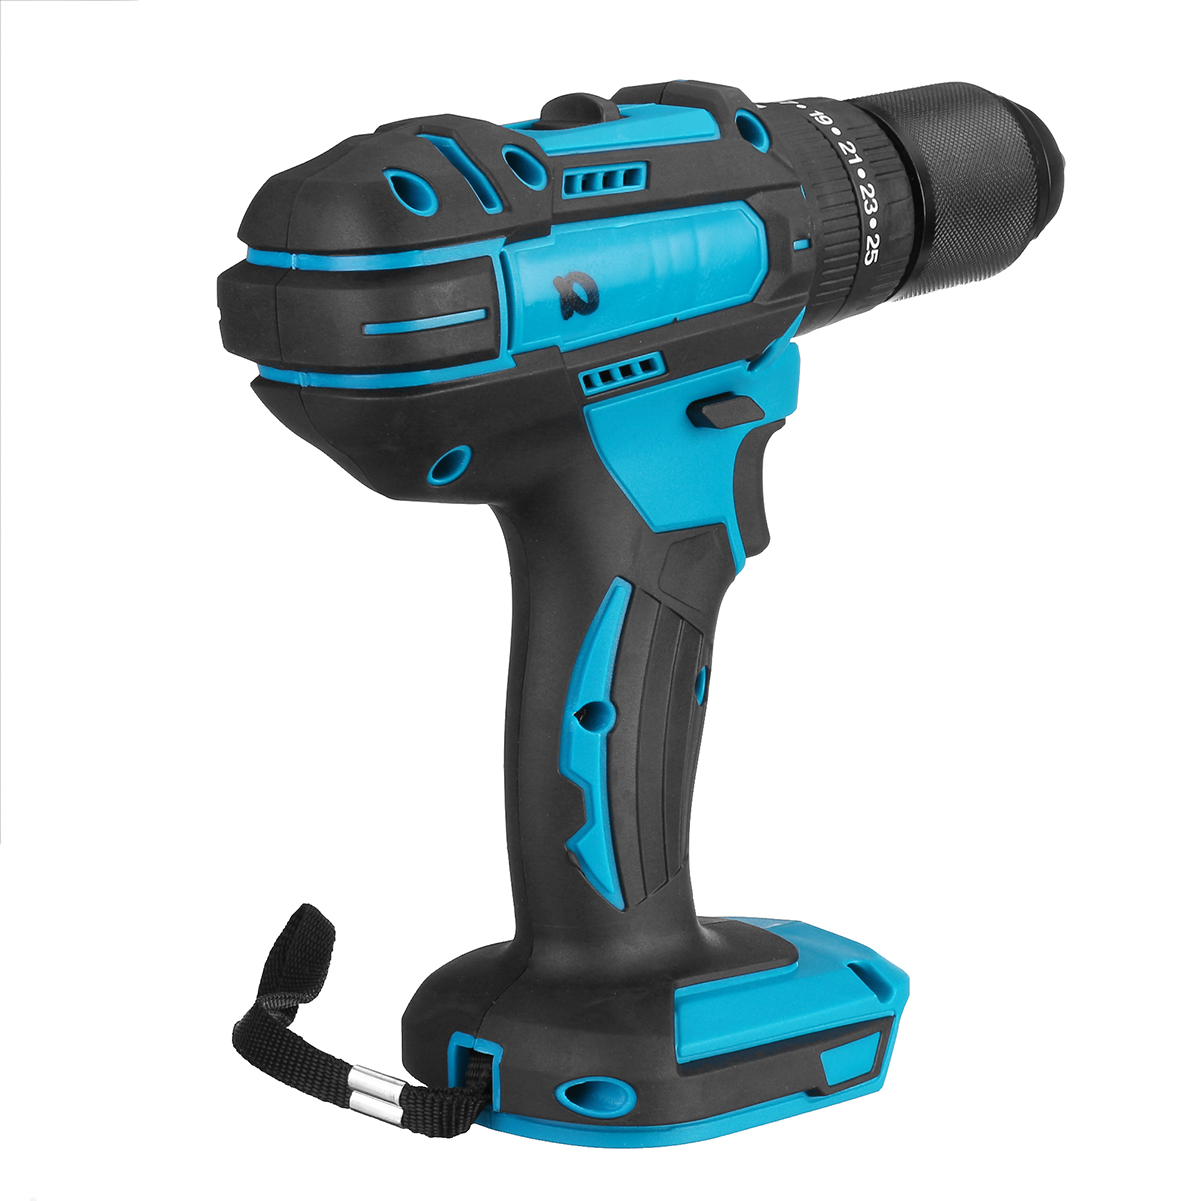 18V-Cordless-Electric-Drill-Driver-Impact-Torque-For-MakitaPower-Tool-1695066-6